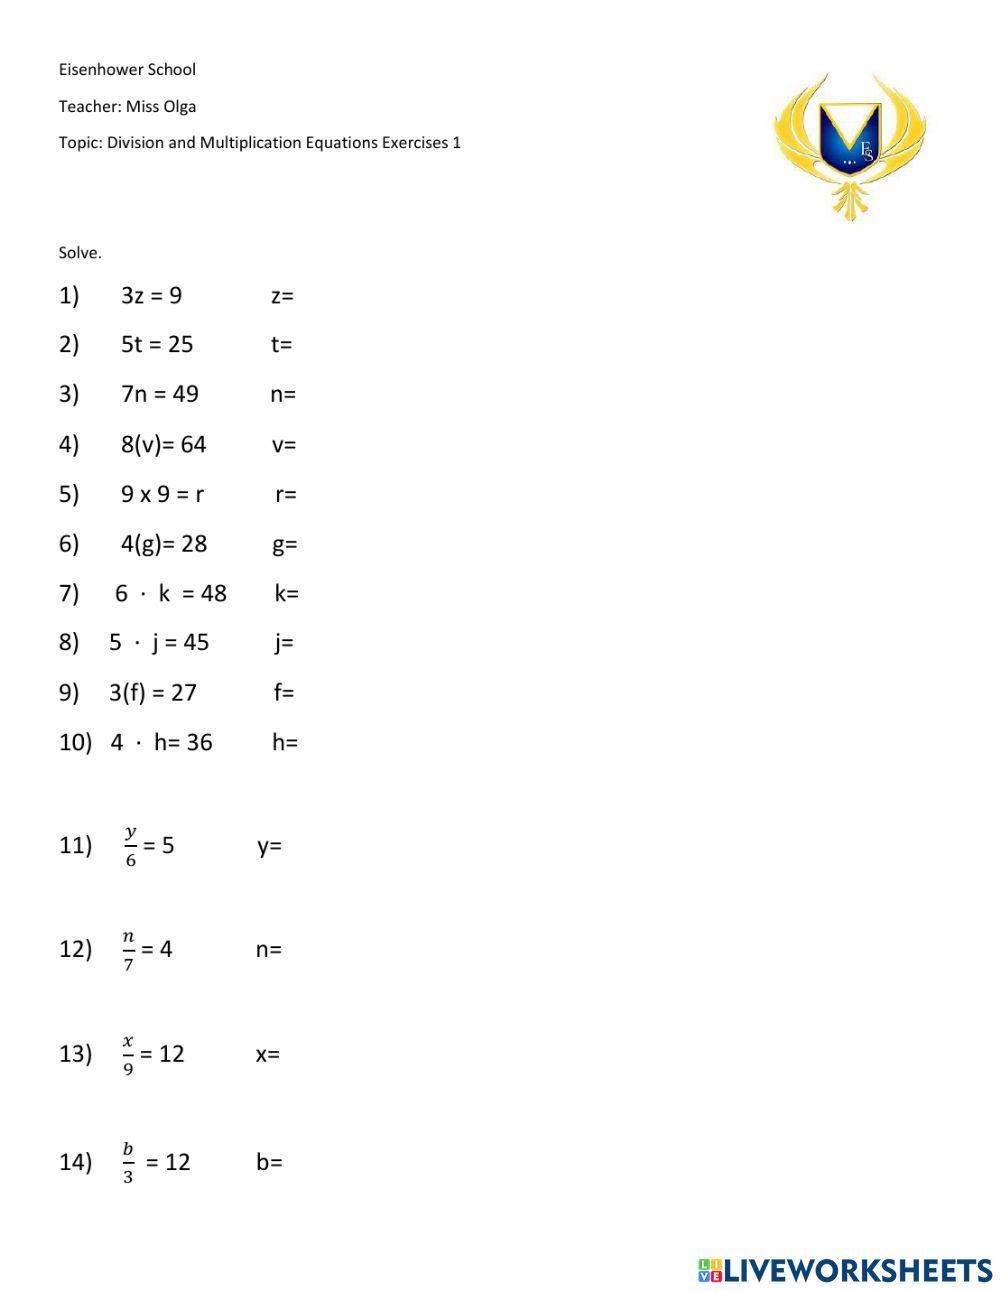 Division and Multiplication Equations Ex 1